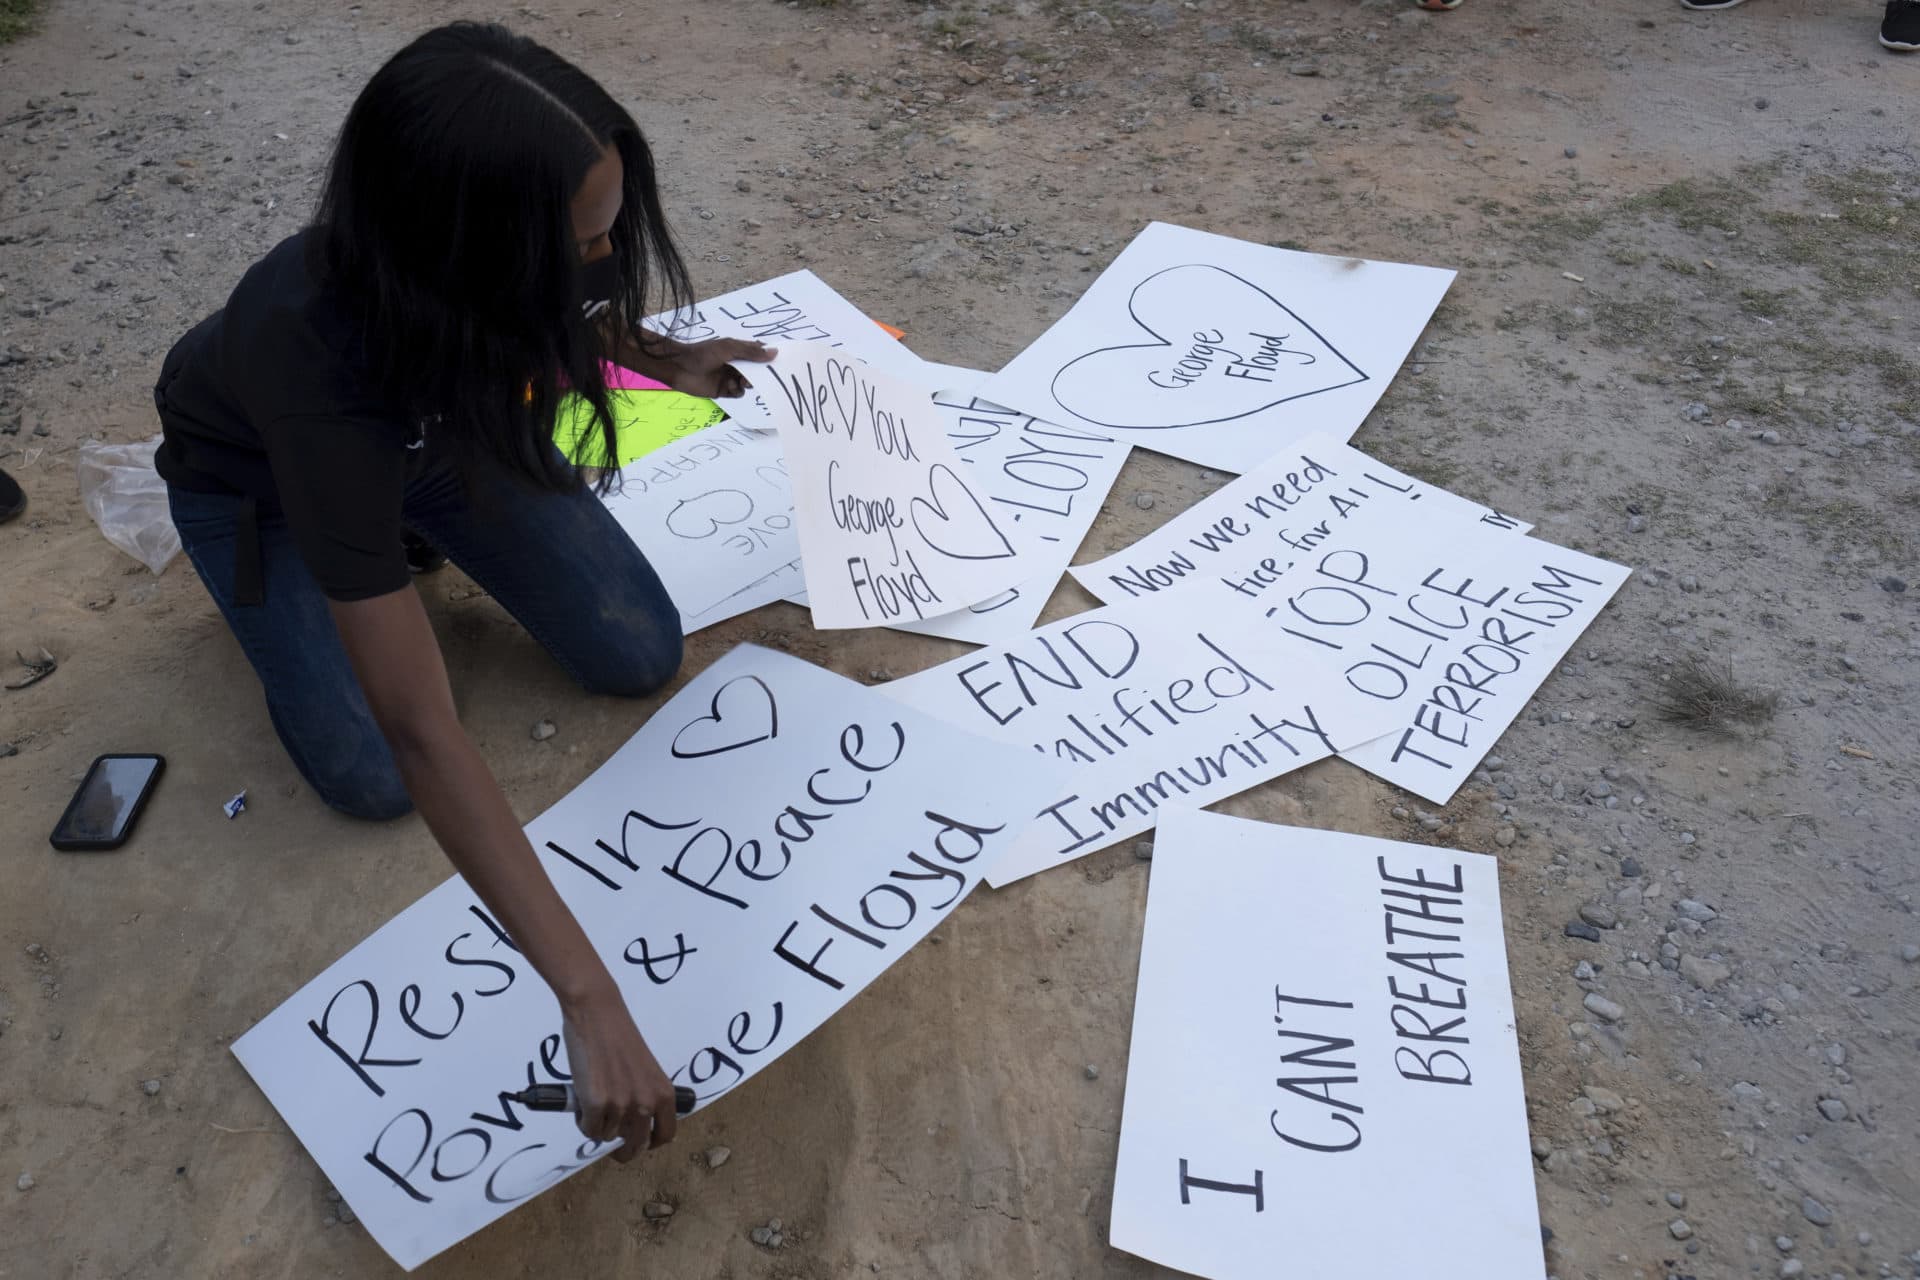 Hannah Joy Gebresilassie draws up a sign during a gathering and march in Atlanta on Tuesday. (Ben Gray/AP)